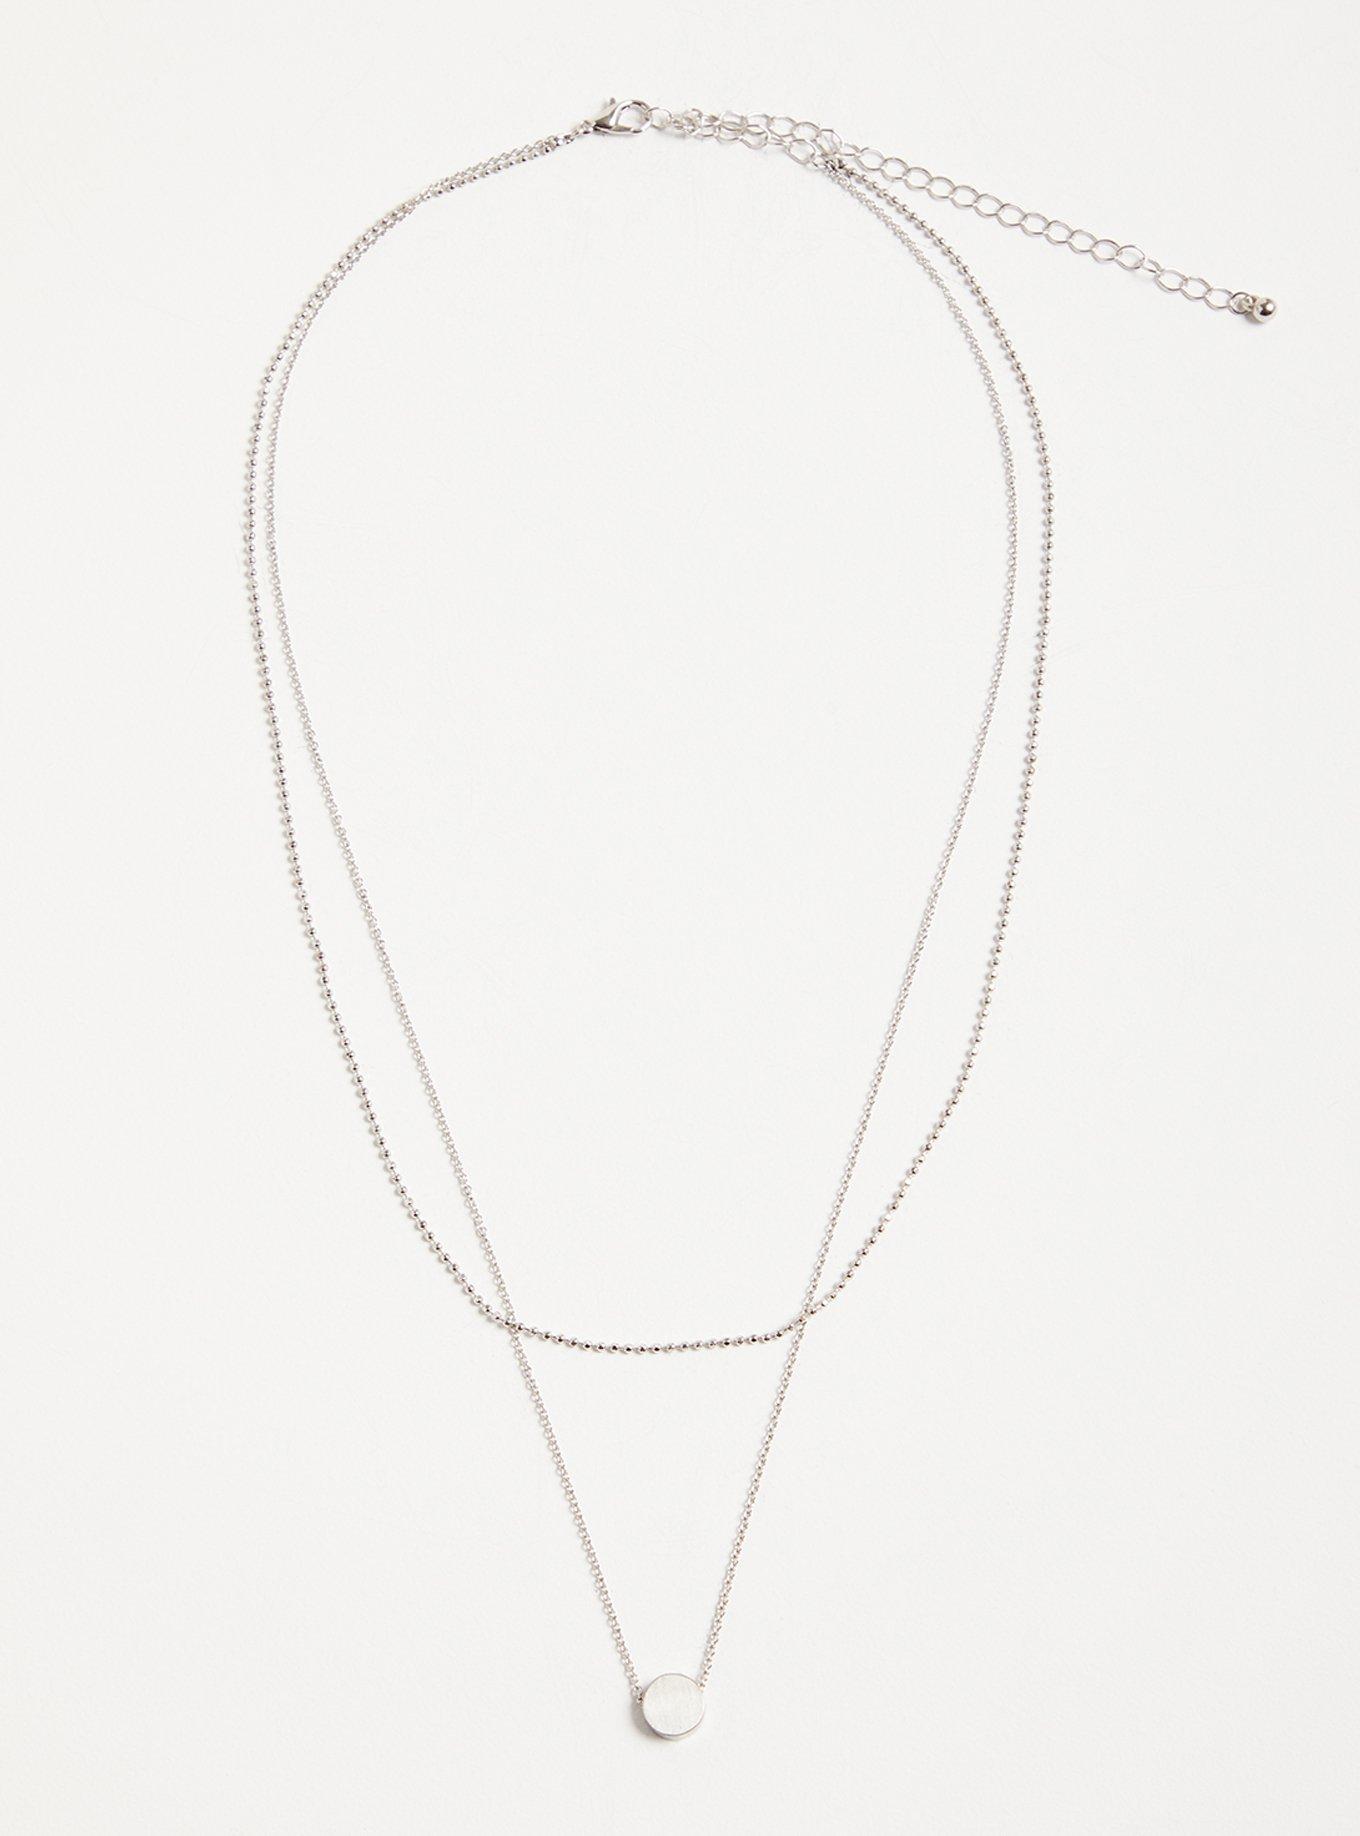 Plus Size - Dot & Disc Layered Necklace - Silver Tone - Torrid